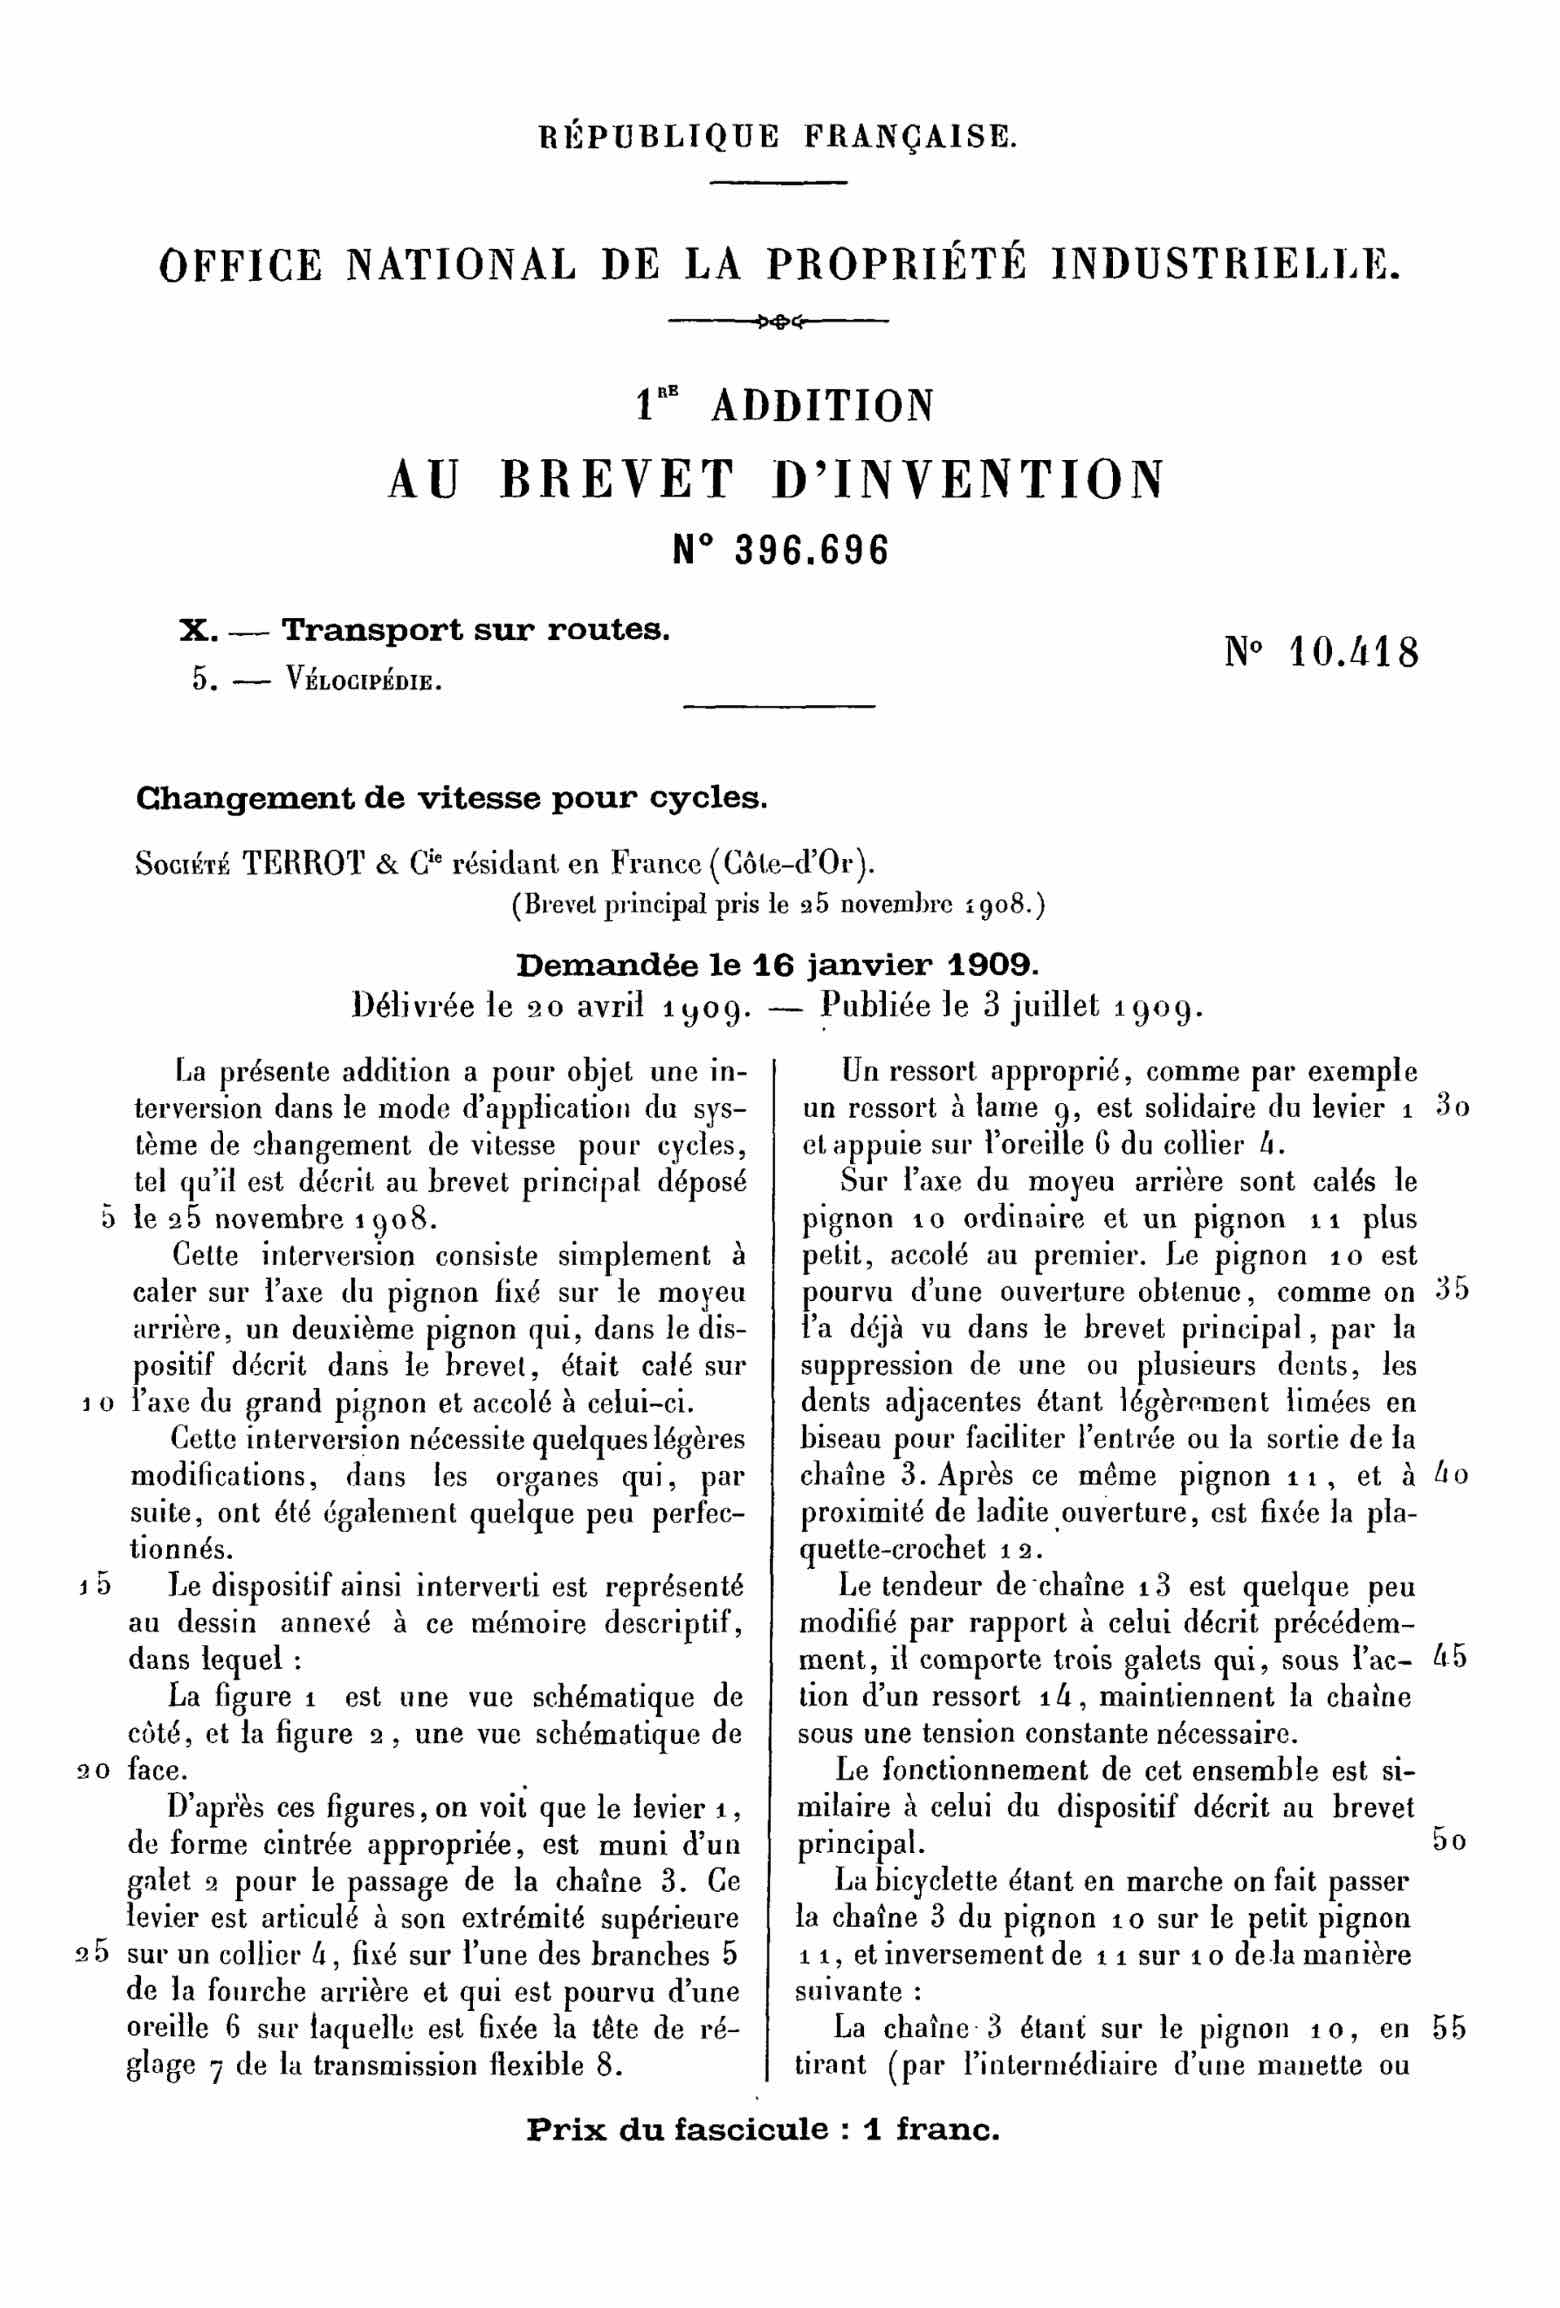 French Patent 396,696 Addition 10,418 - Terrot Numero 1 scan 1 main image